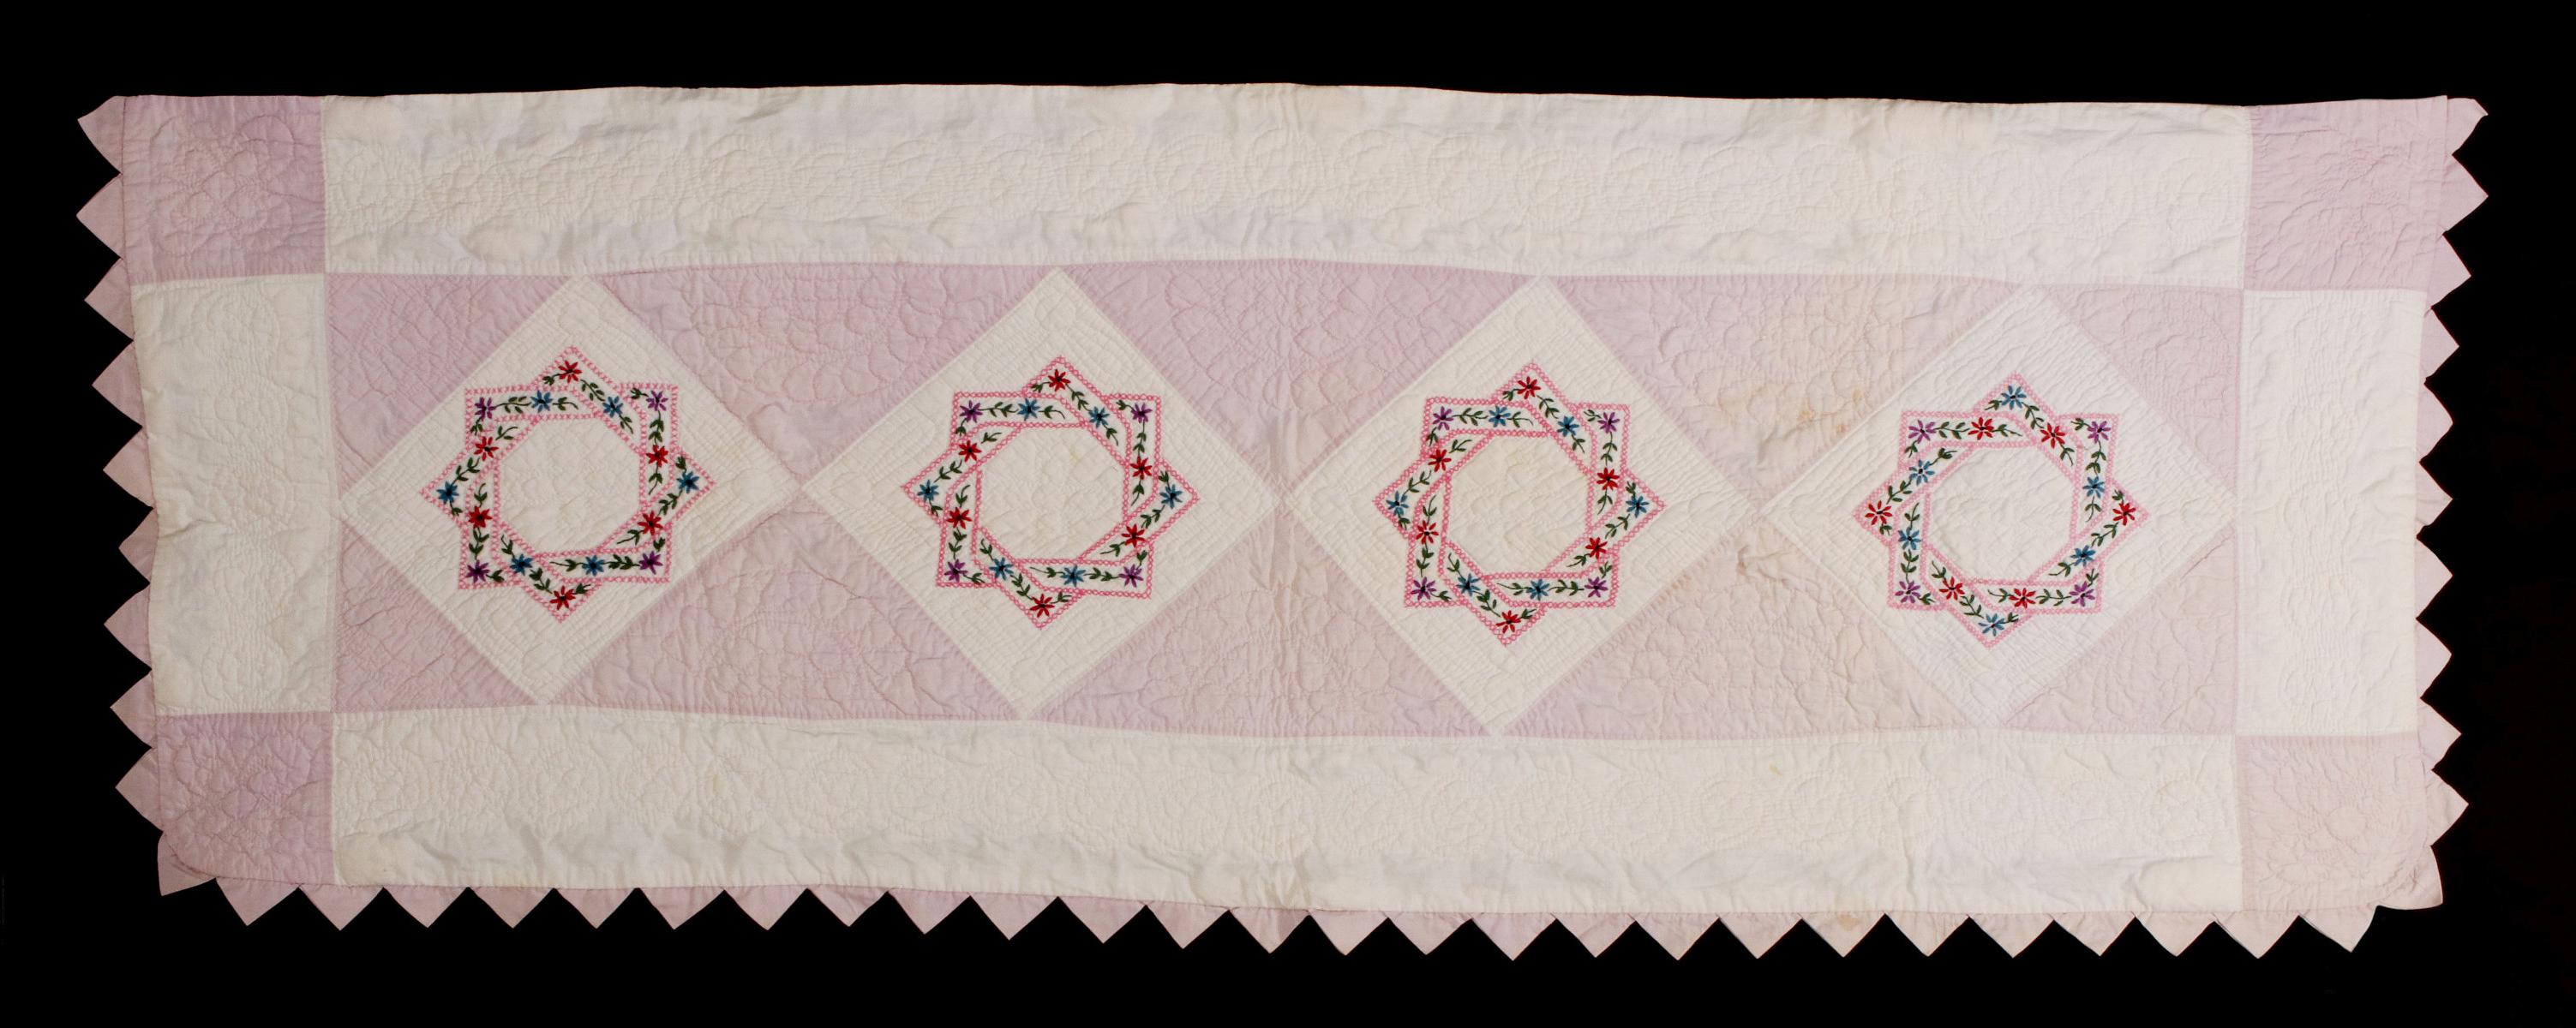 A VINTAGE QUILTED AND EMBROIDERED PILLOW SHAM